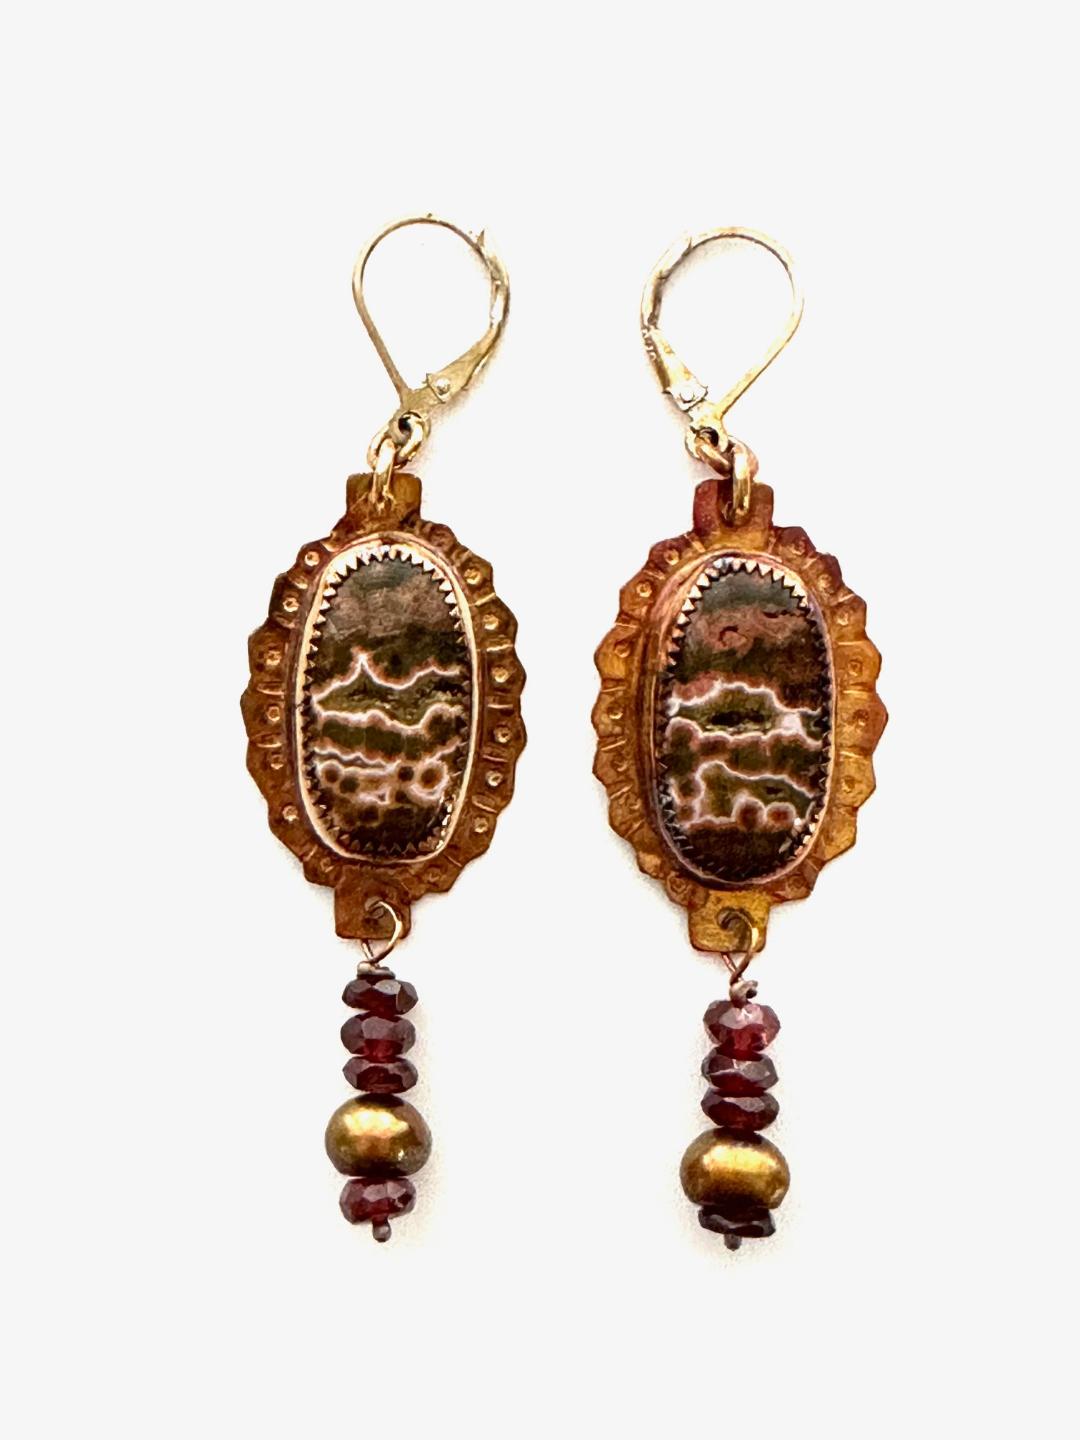 Sterling Silver, Fine Silver Bezel, and Orbicular Jasper with Hints of Quartz Crystals Peaking Through Earrings with a Garnet and Pearl Dangle and a Lever Earwire